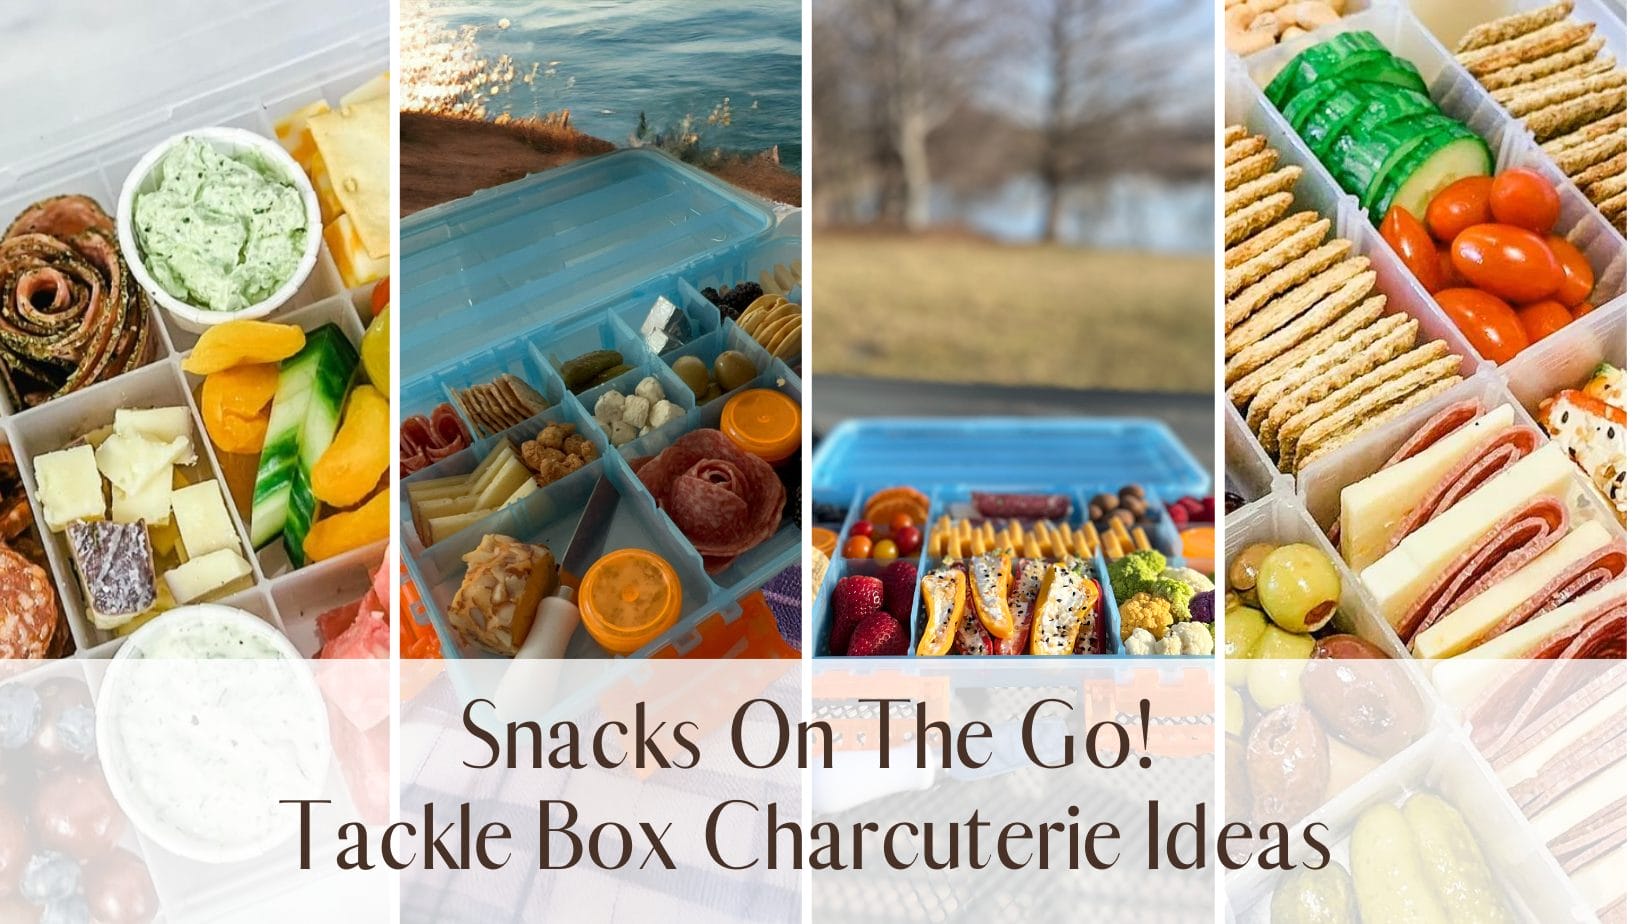 10 Tackle Box Snack Ideas to Keep You on the Water - Richmond Fishing Supply